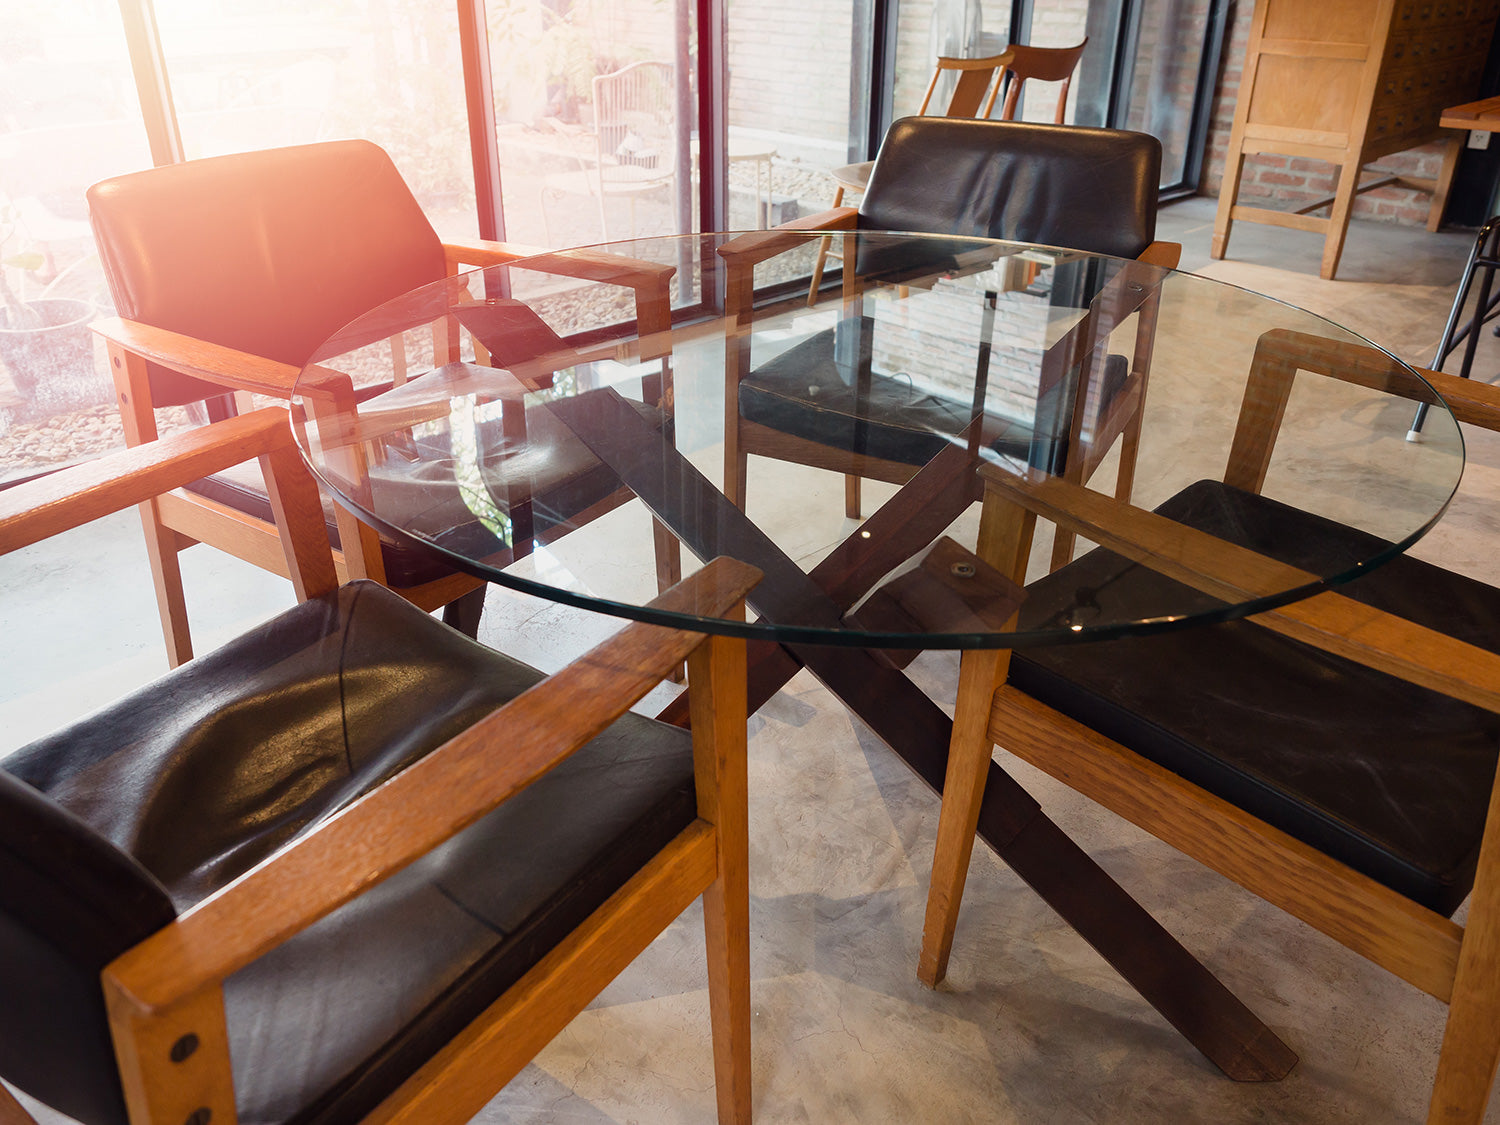 Round clear glass table with four chairs made of wood with black leather cushions surrounding the table